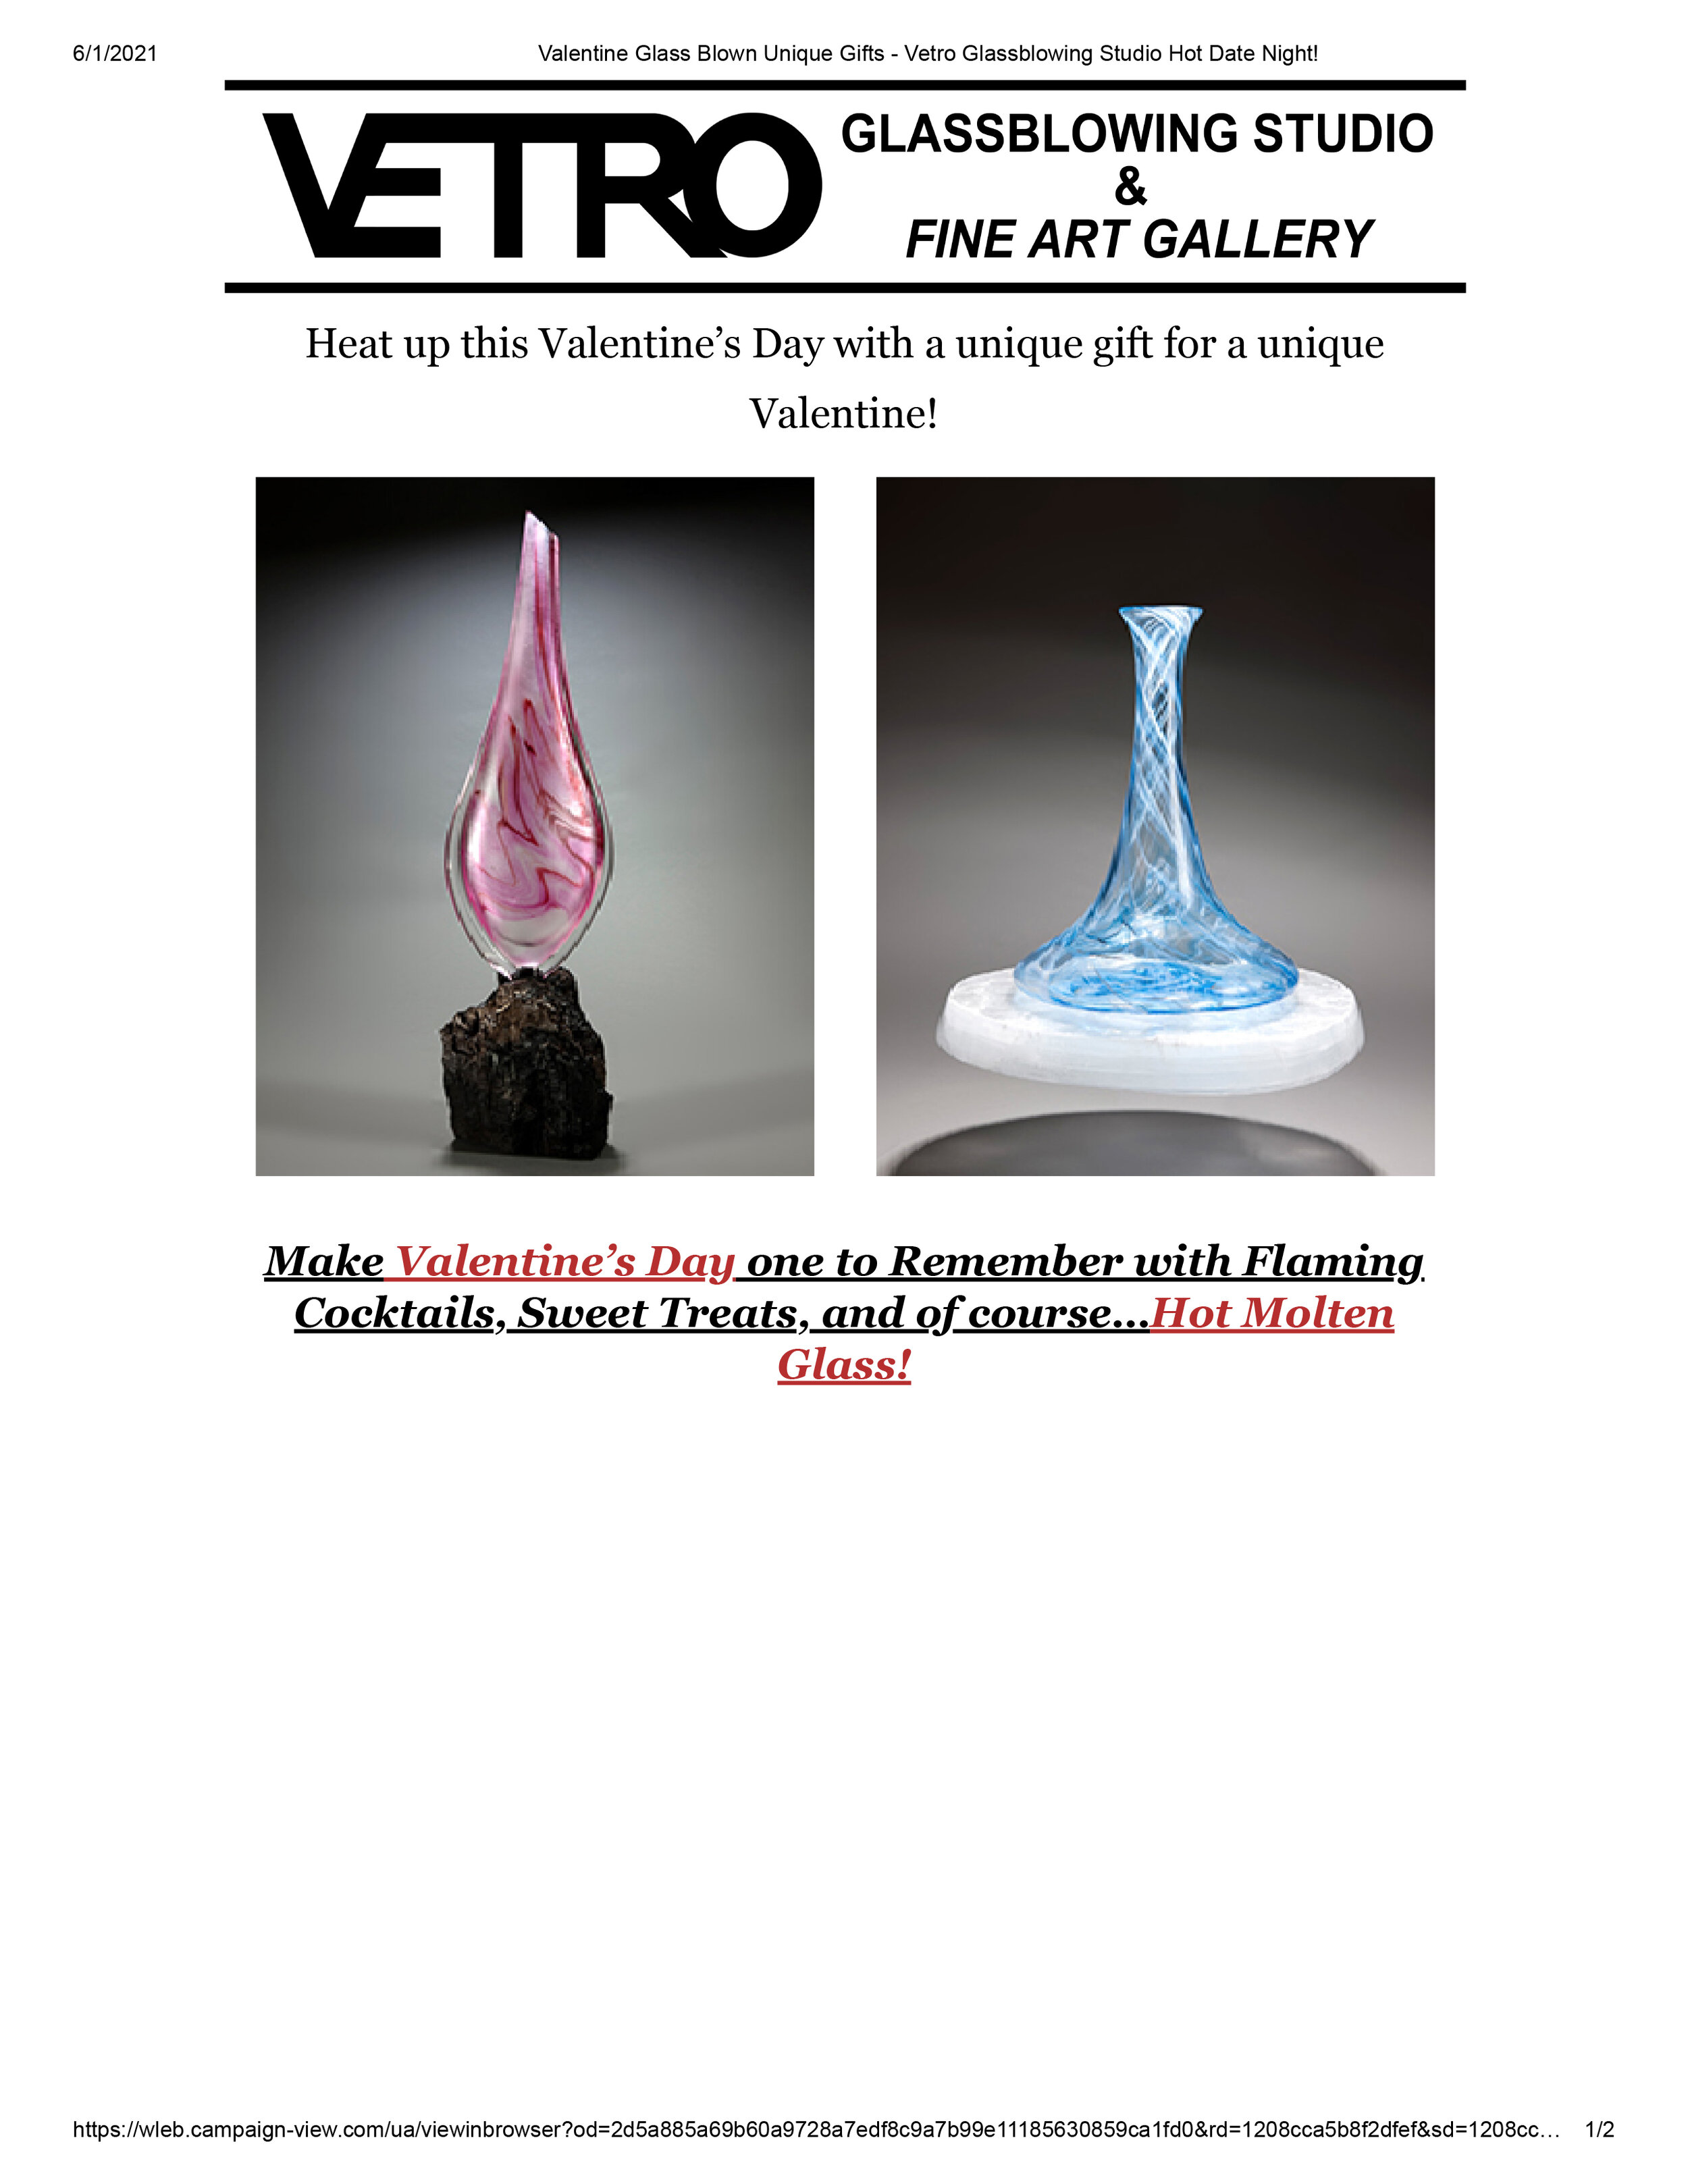 Email Campaigns -Vetro Glassblowing Studio - Heat up this Valentine’s Day with a unique gift -1.jpg